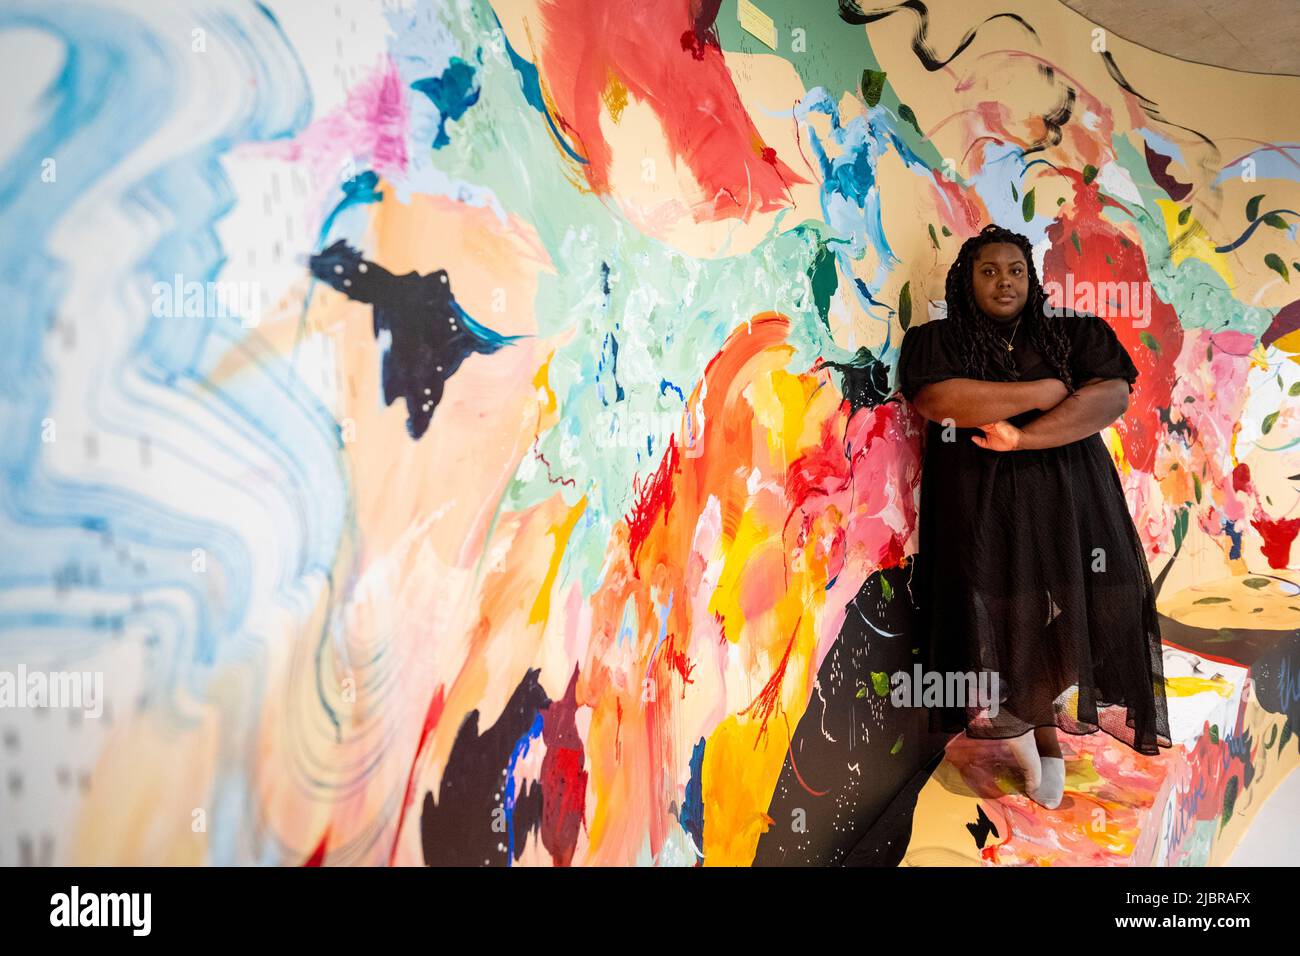 https://c8.alamy.com/comp/2JBRAFX/london-uk-8-june-2022-painter-michaela-yearwood-dan-poses-with-her-work-let-me-hold-you-a-curved-mural-on-display-at-the-newly-opened-permanent-arts-space-for-lgbtq-artists-and-community-at-queercircle-in-north-greenwich-credit-stephen-chung-alamy-live-news-2JBRAFX.jpg